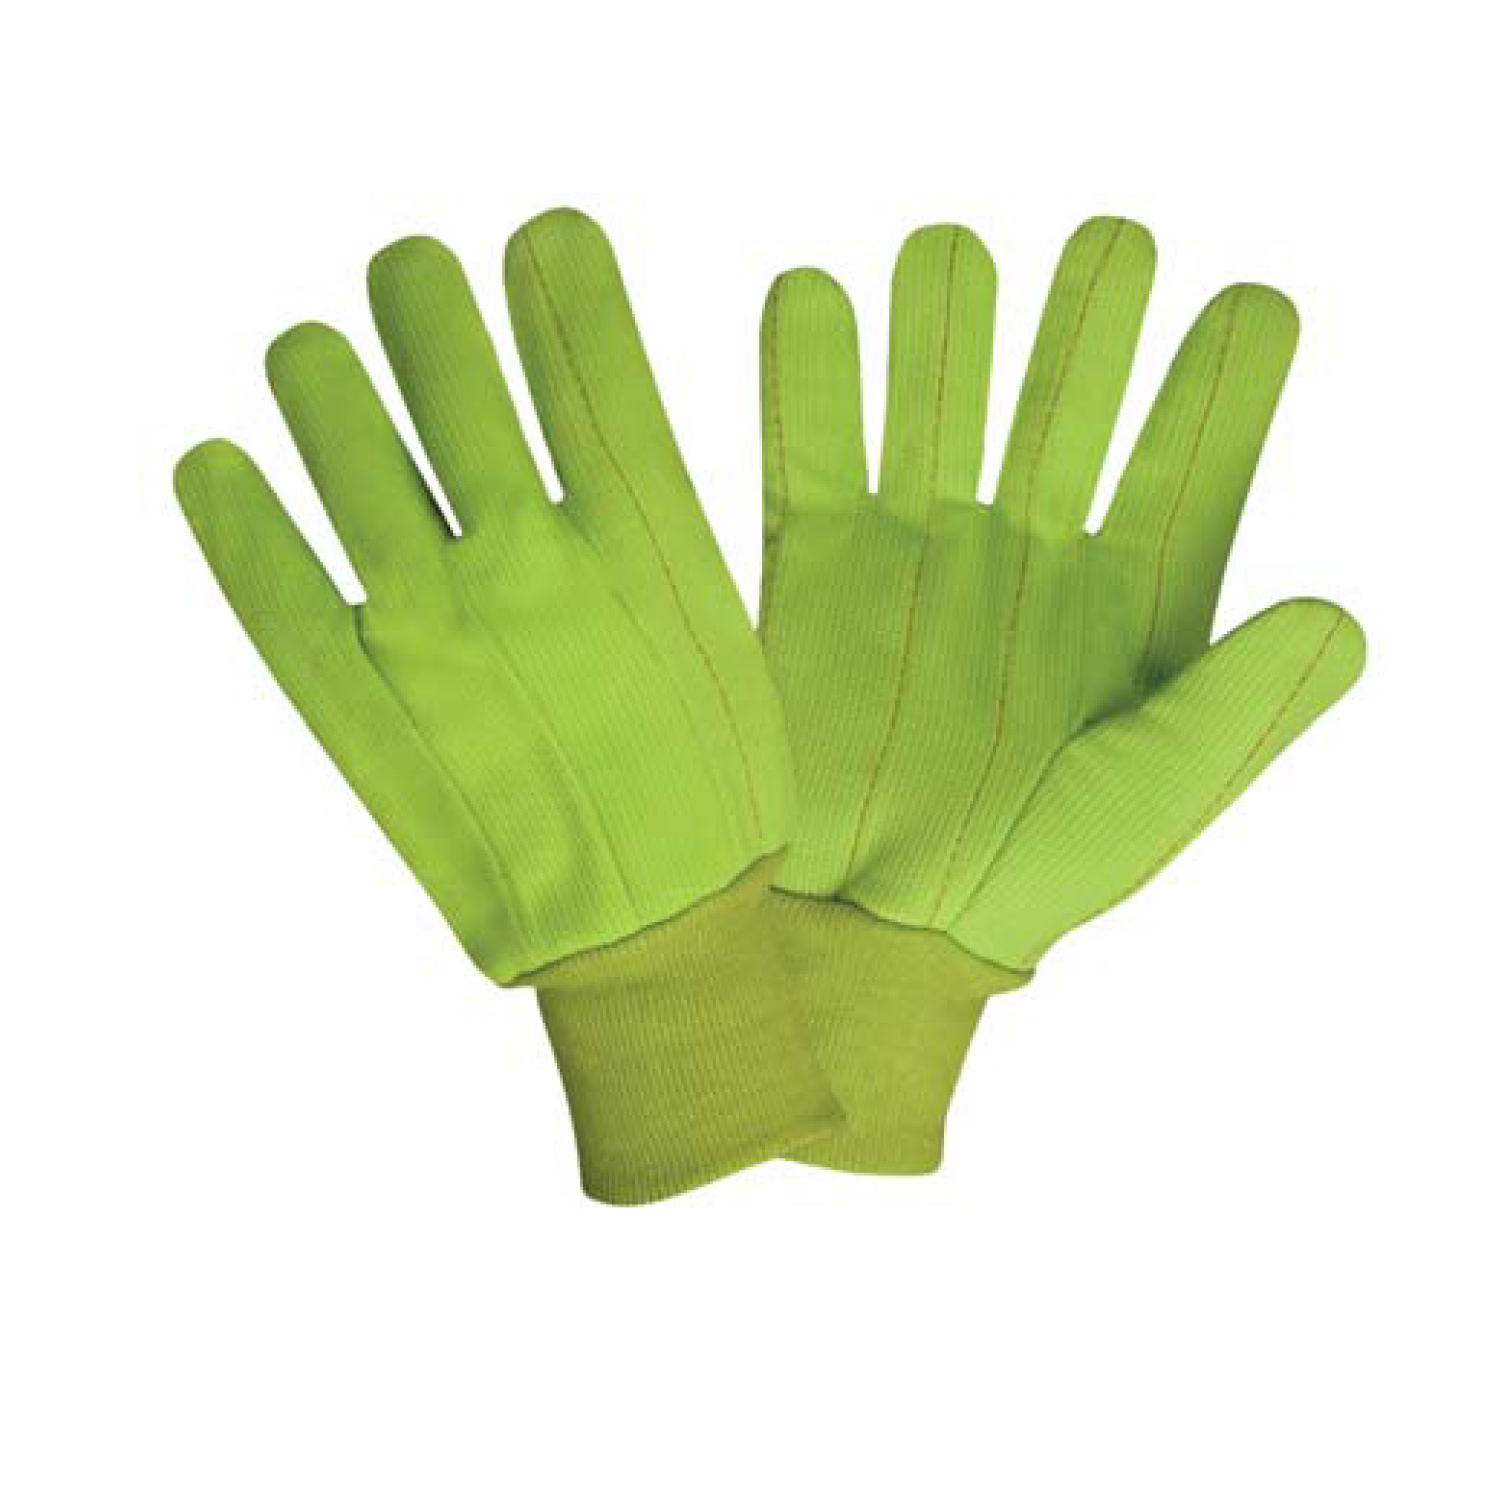 High Visibility, Lime Green, 18-ounce, Double Palm Gloves, 100% Cotton Corded Canvas Fabric, Clute Pattern, Lime Green Knit Wrist #2850CD